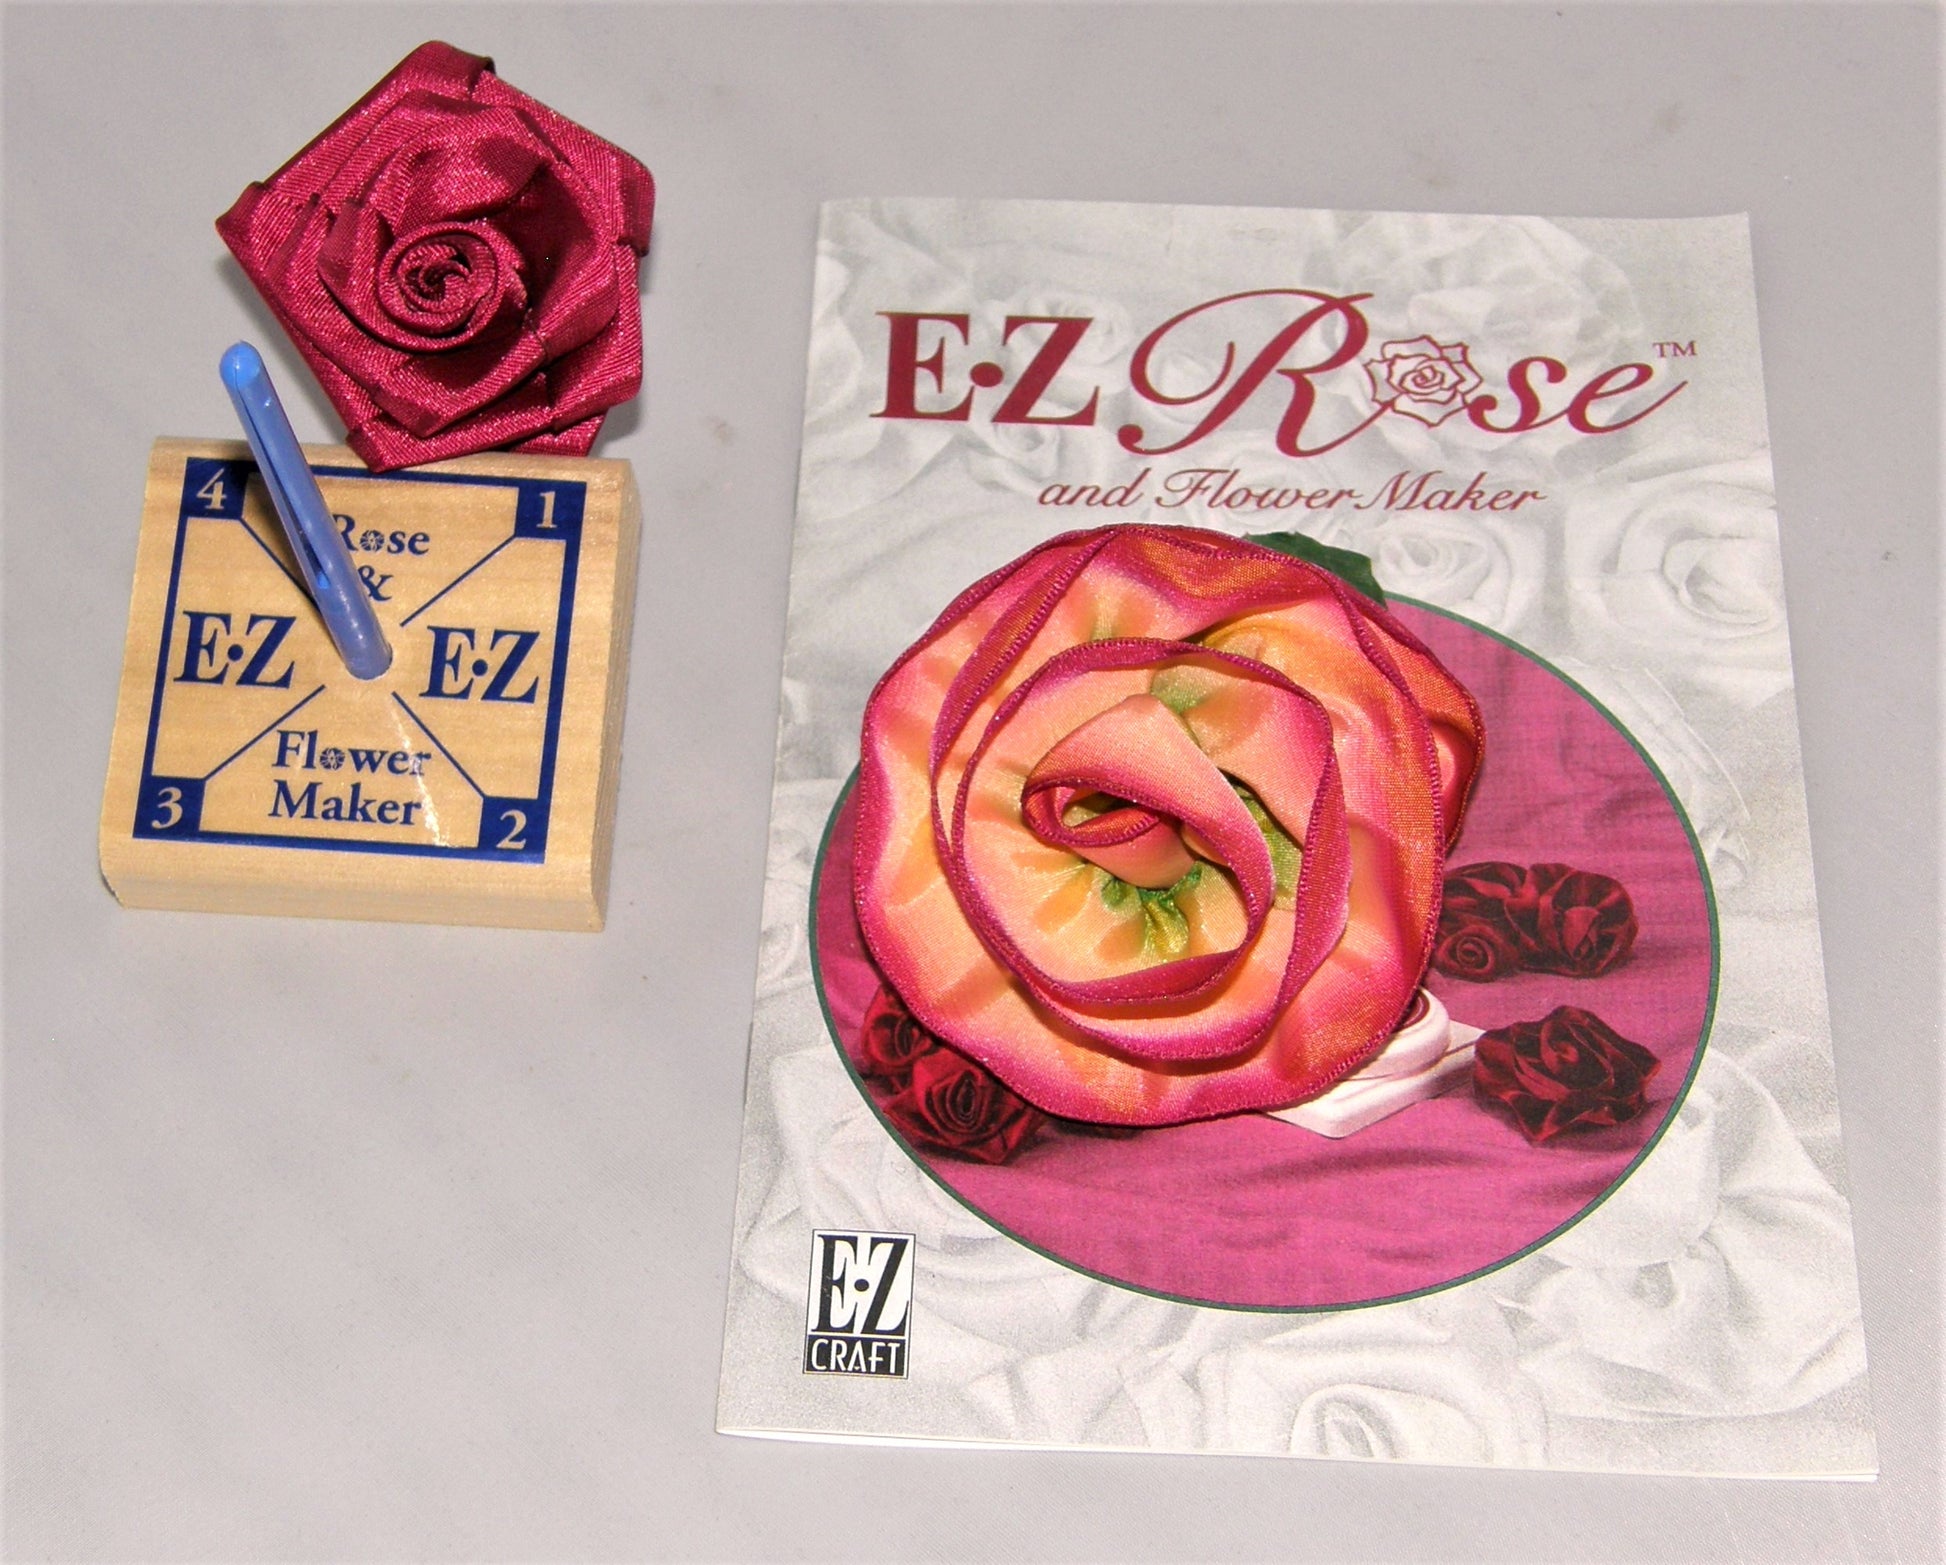 Limited Sale! Deluxe EZ Bow Maker with Ribbon Rose & Flower Maker